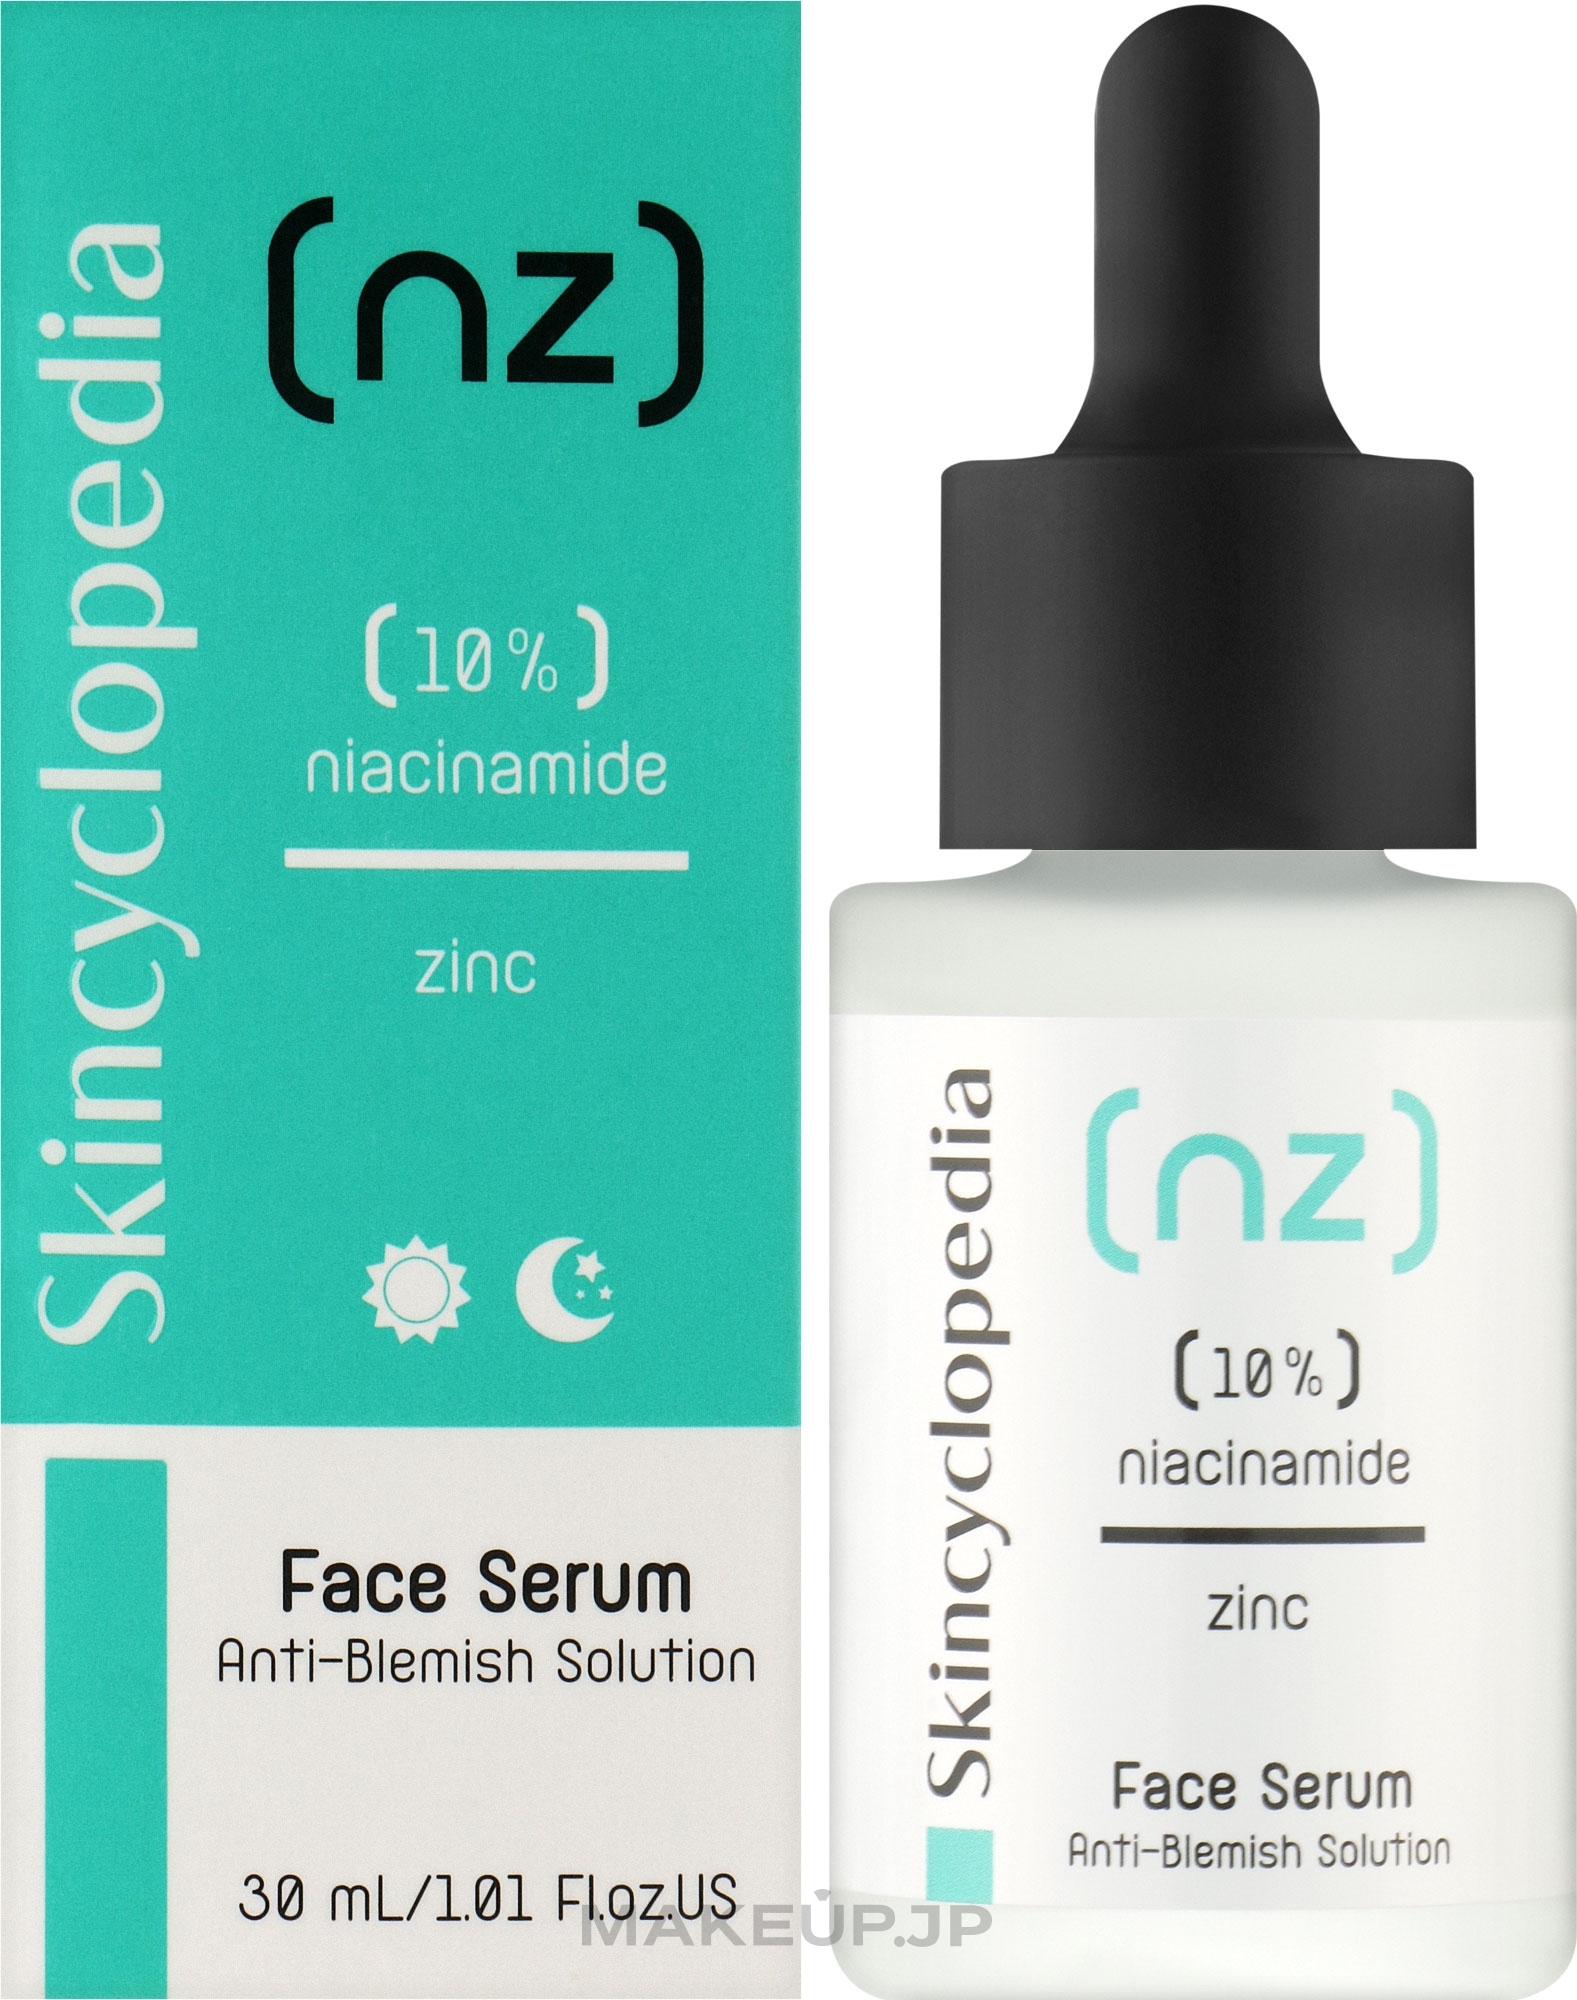 Anti-Pigmentation Face Serum with Niacinamide & Zinc - Skincyclopedia Blemish-Soothing Face Serum With 10% Niacinamide And 1% Zinc — photo 30 ml